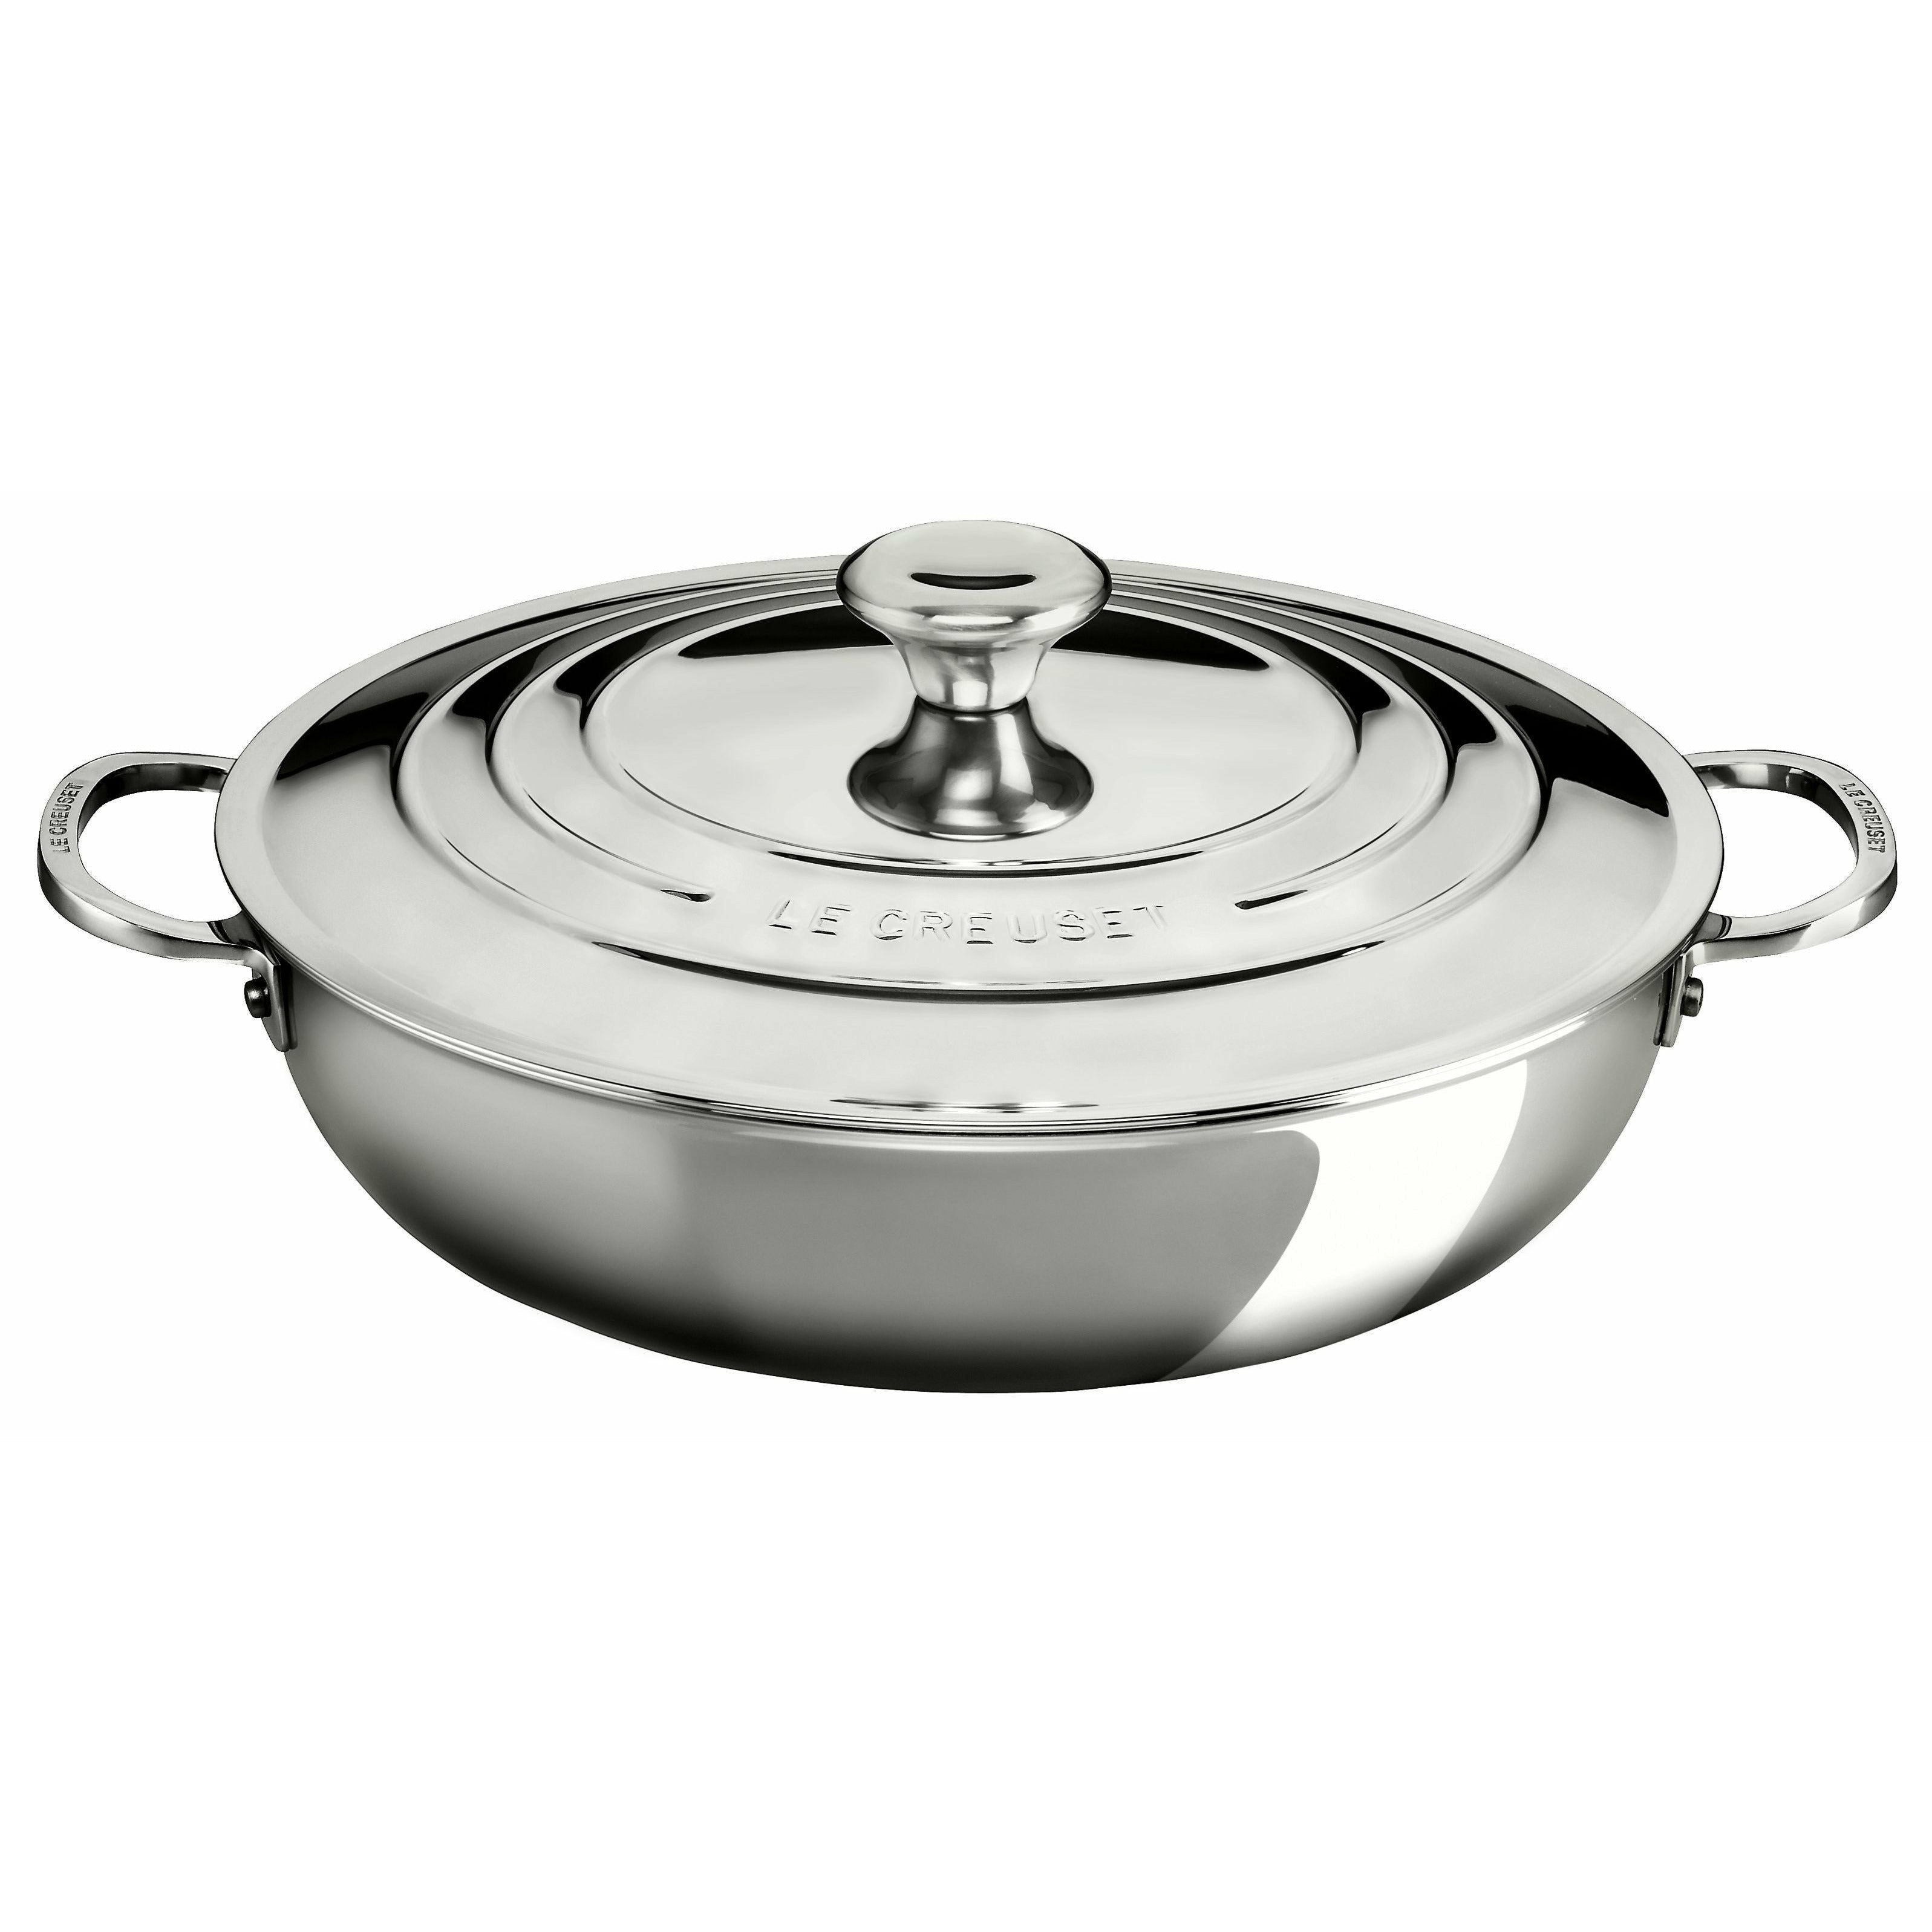 Le Creuset Signature Stainless Steel Shallow Casserole 4.8 L With Lid